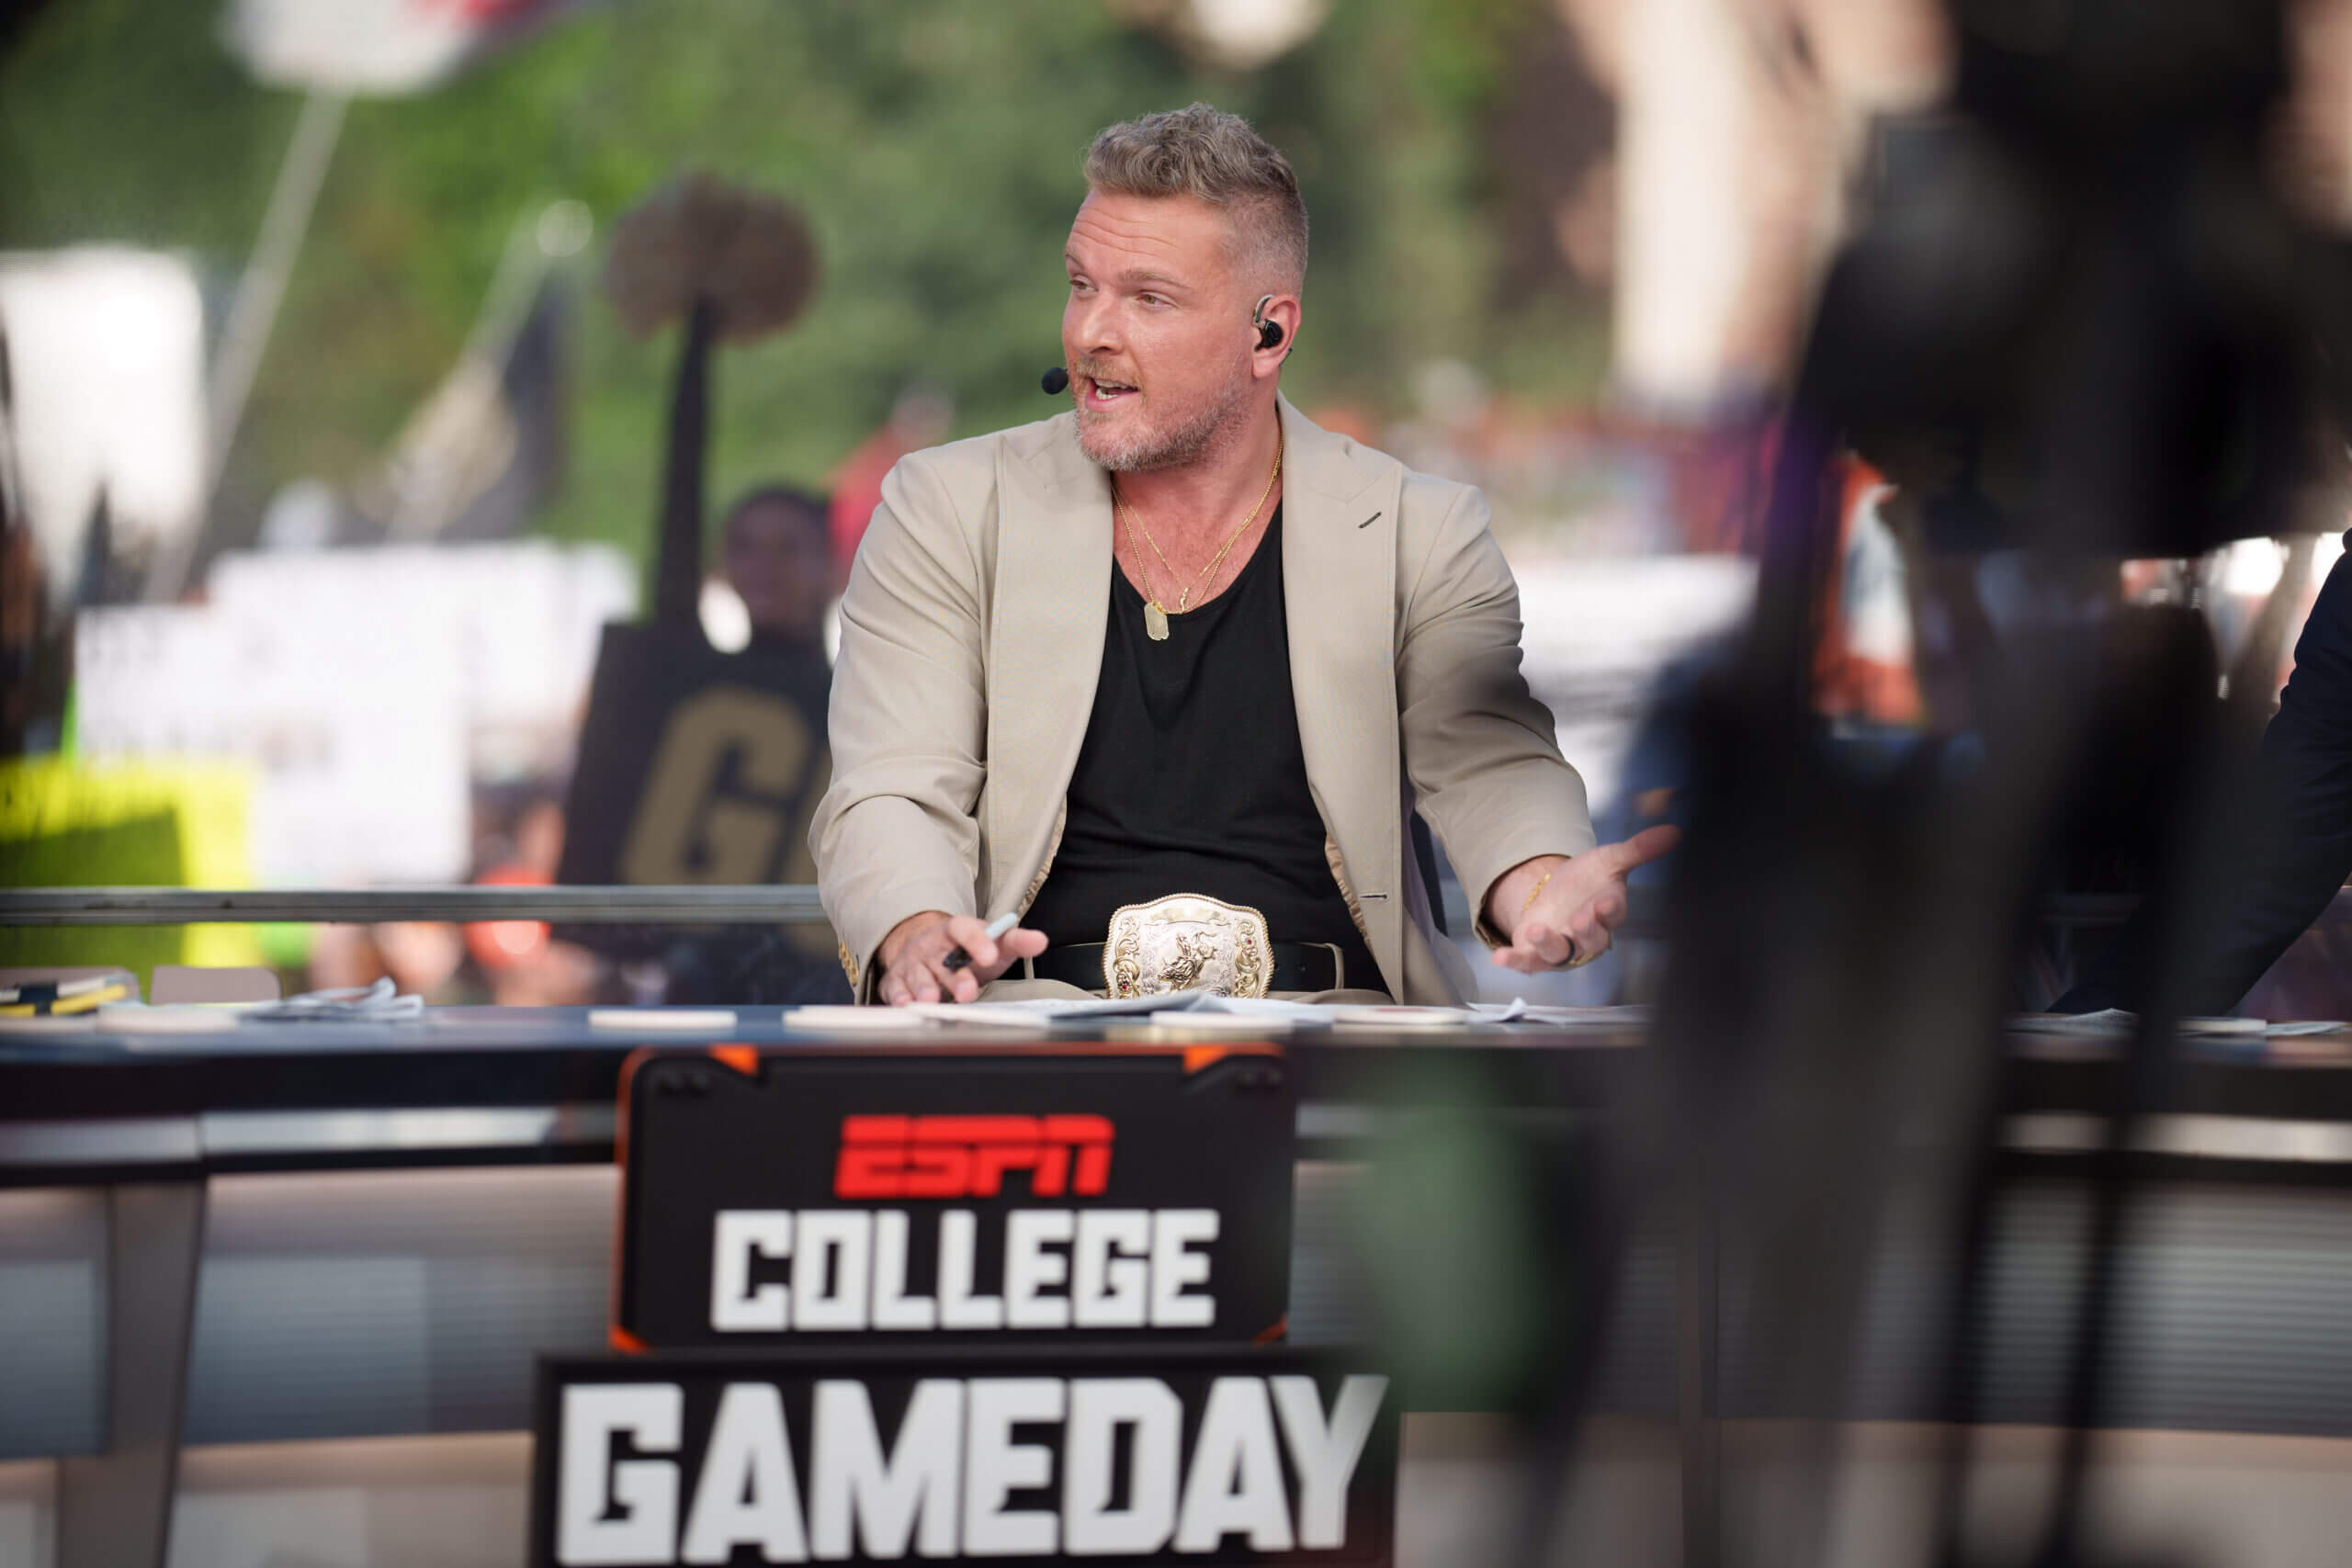 Pat McAfee’s jab at ESPN Emmy scandal latest in history of barbs against his own network